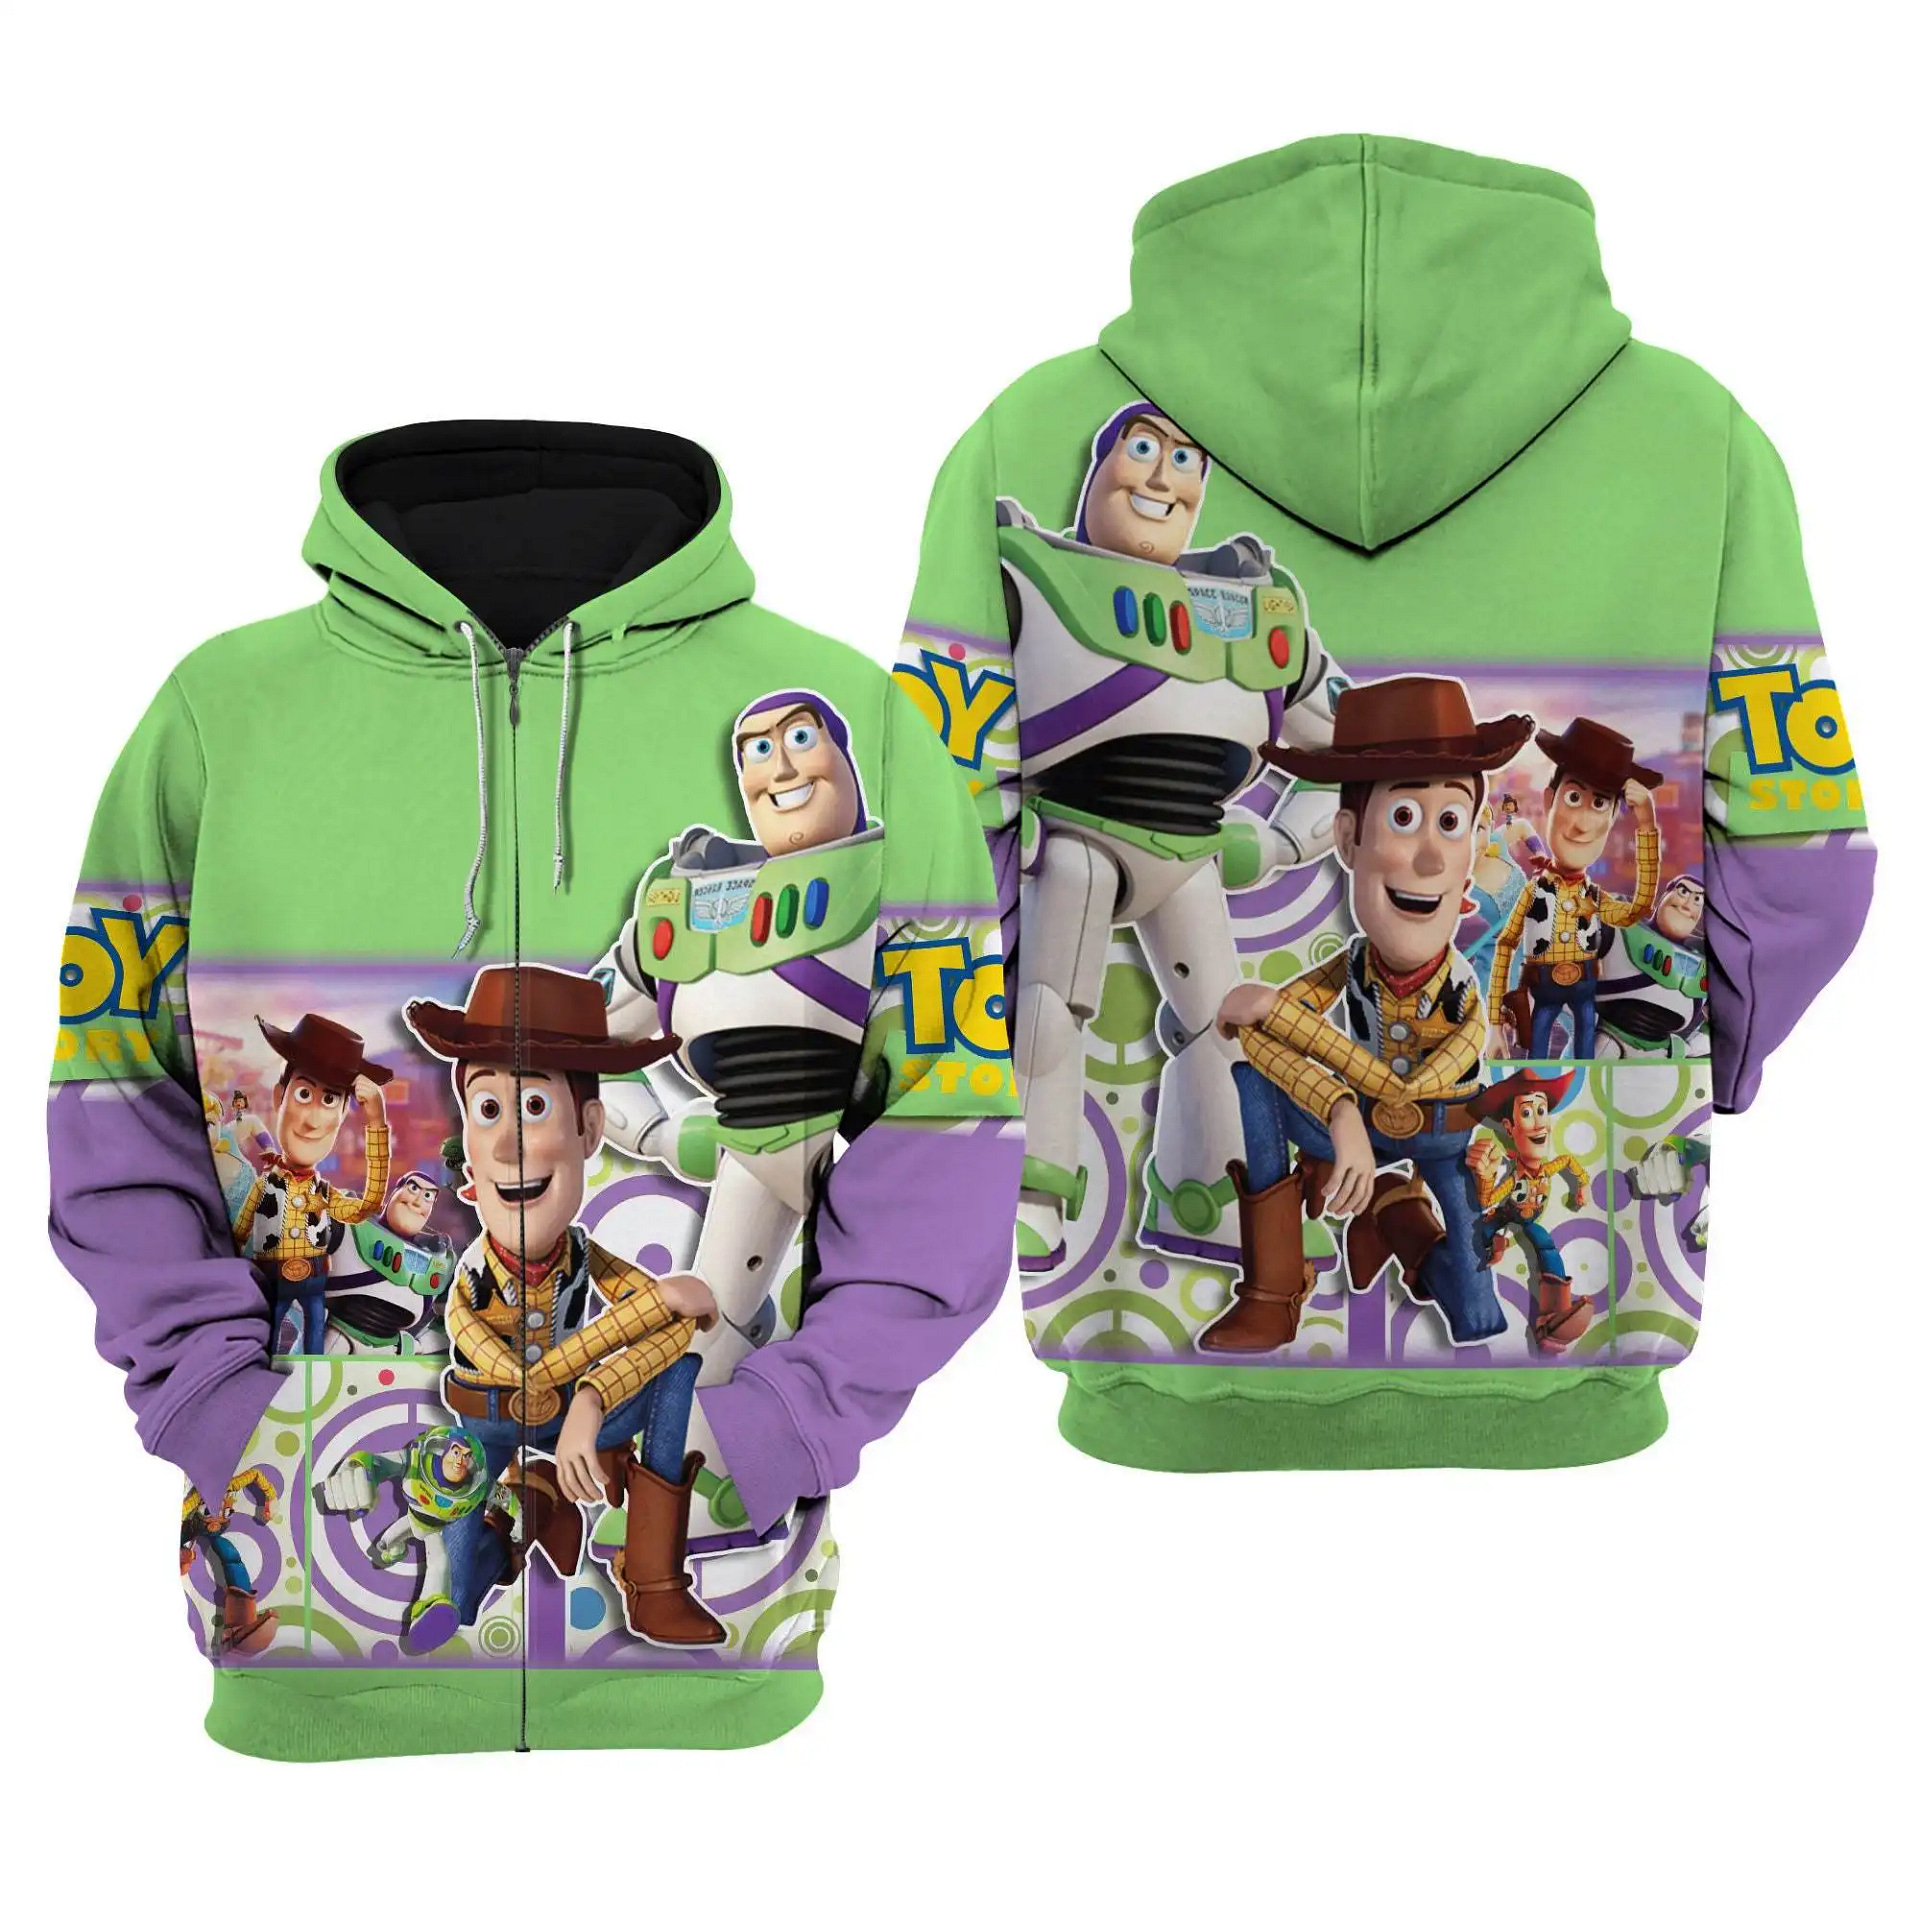 Disney Toy Story Green And Purple Disney Cartoon Graphic Outfits Clothing Men Women Kids Toddlers Hoodie 3D